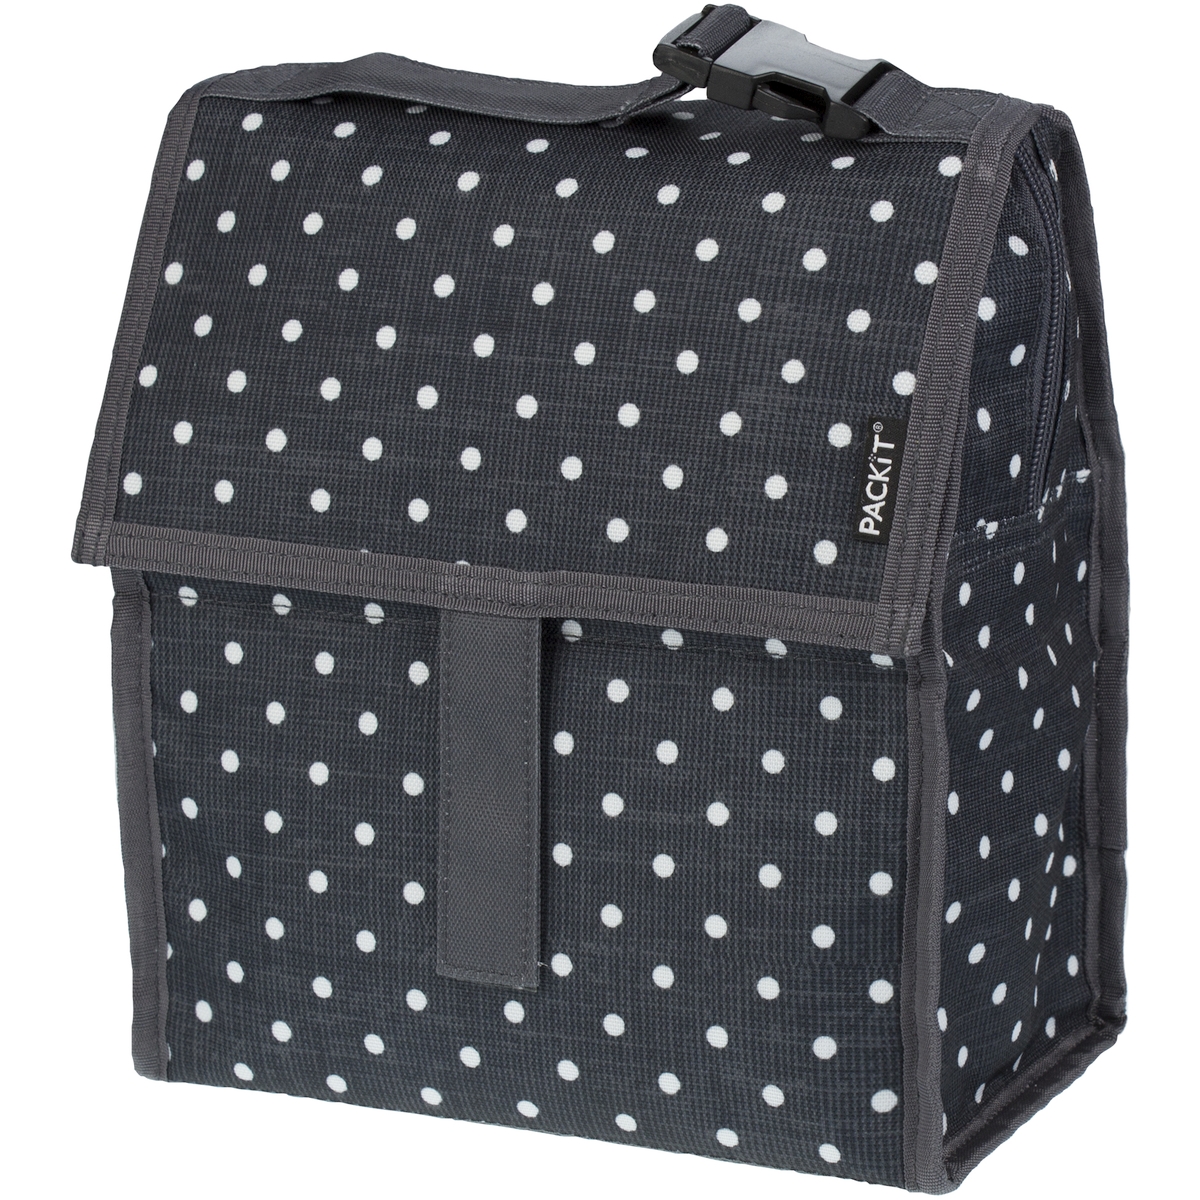     Lunch bag Polka Dots (PACKiT PACKIT0028)